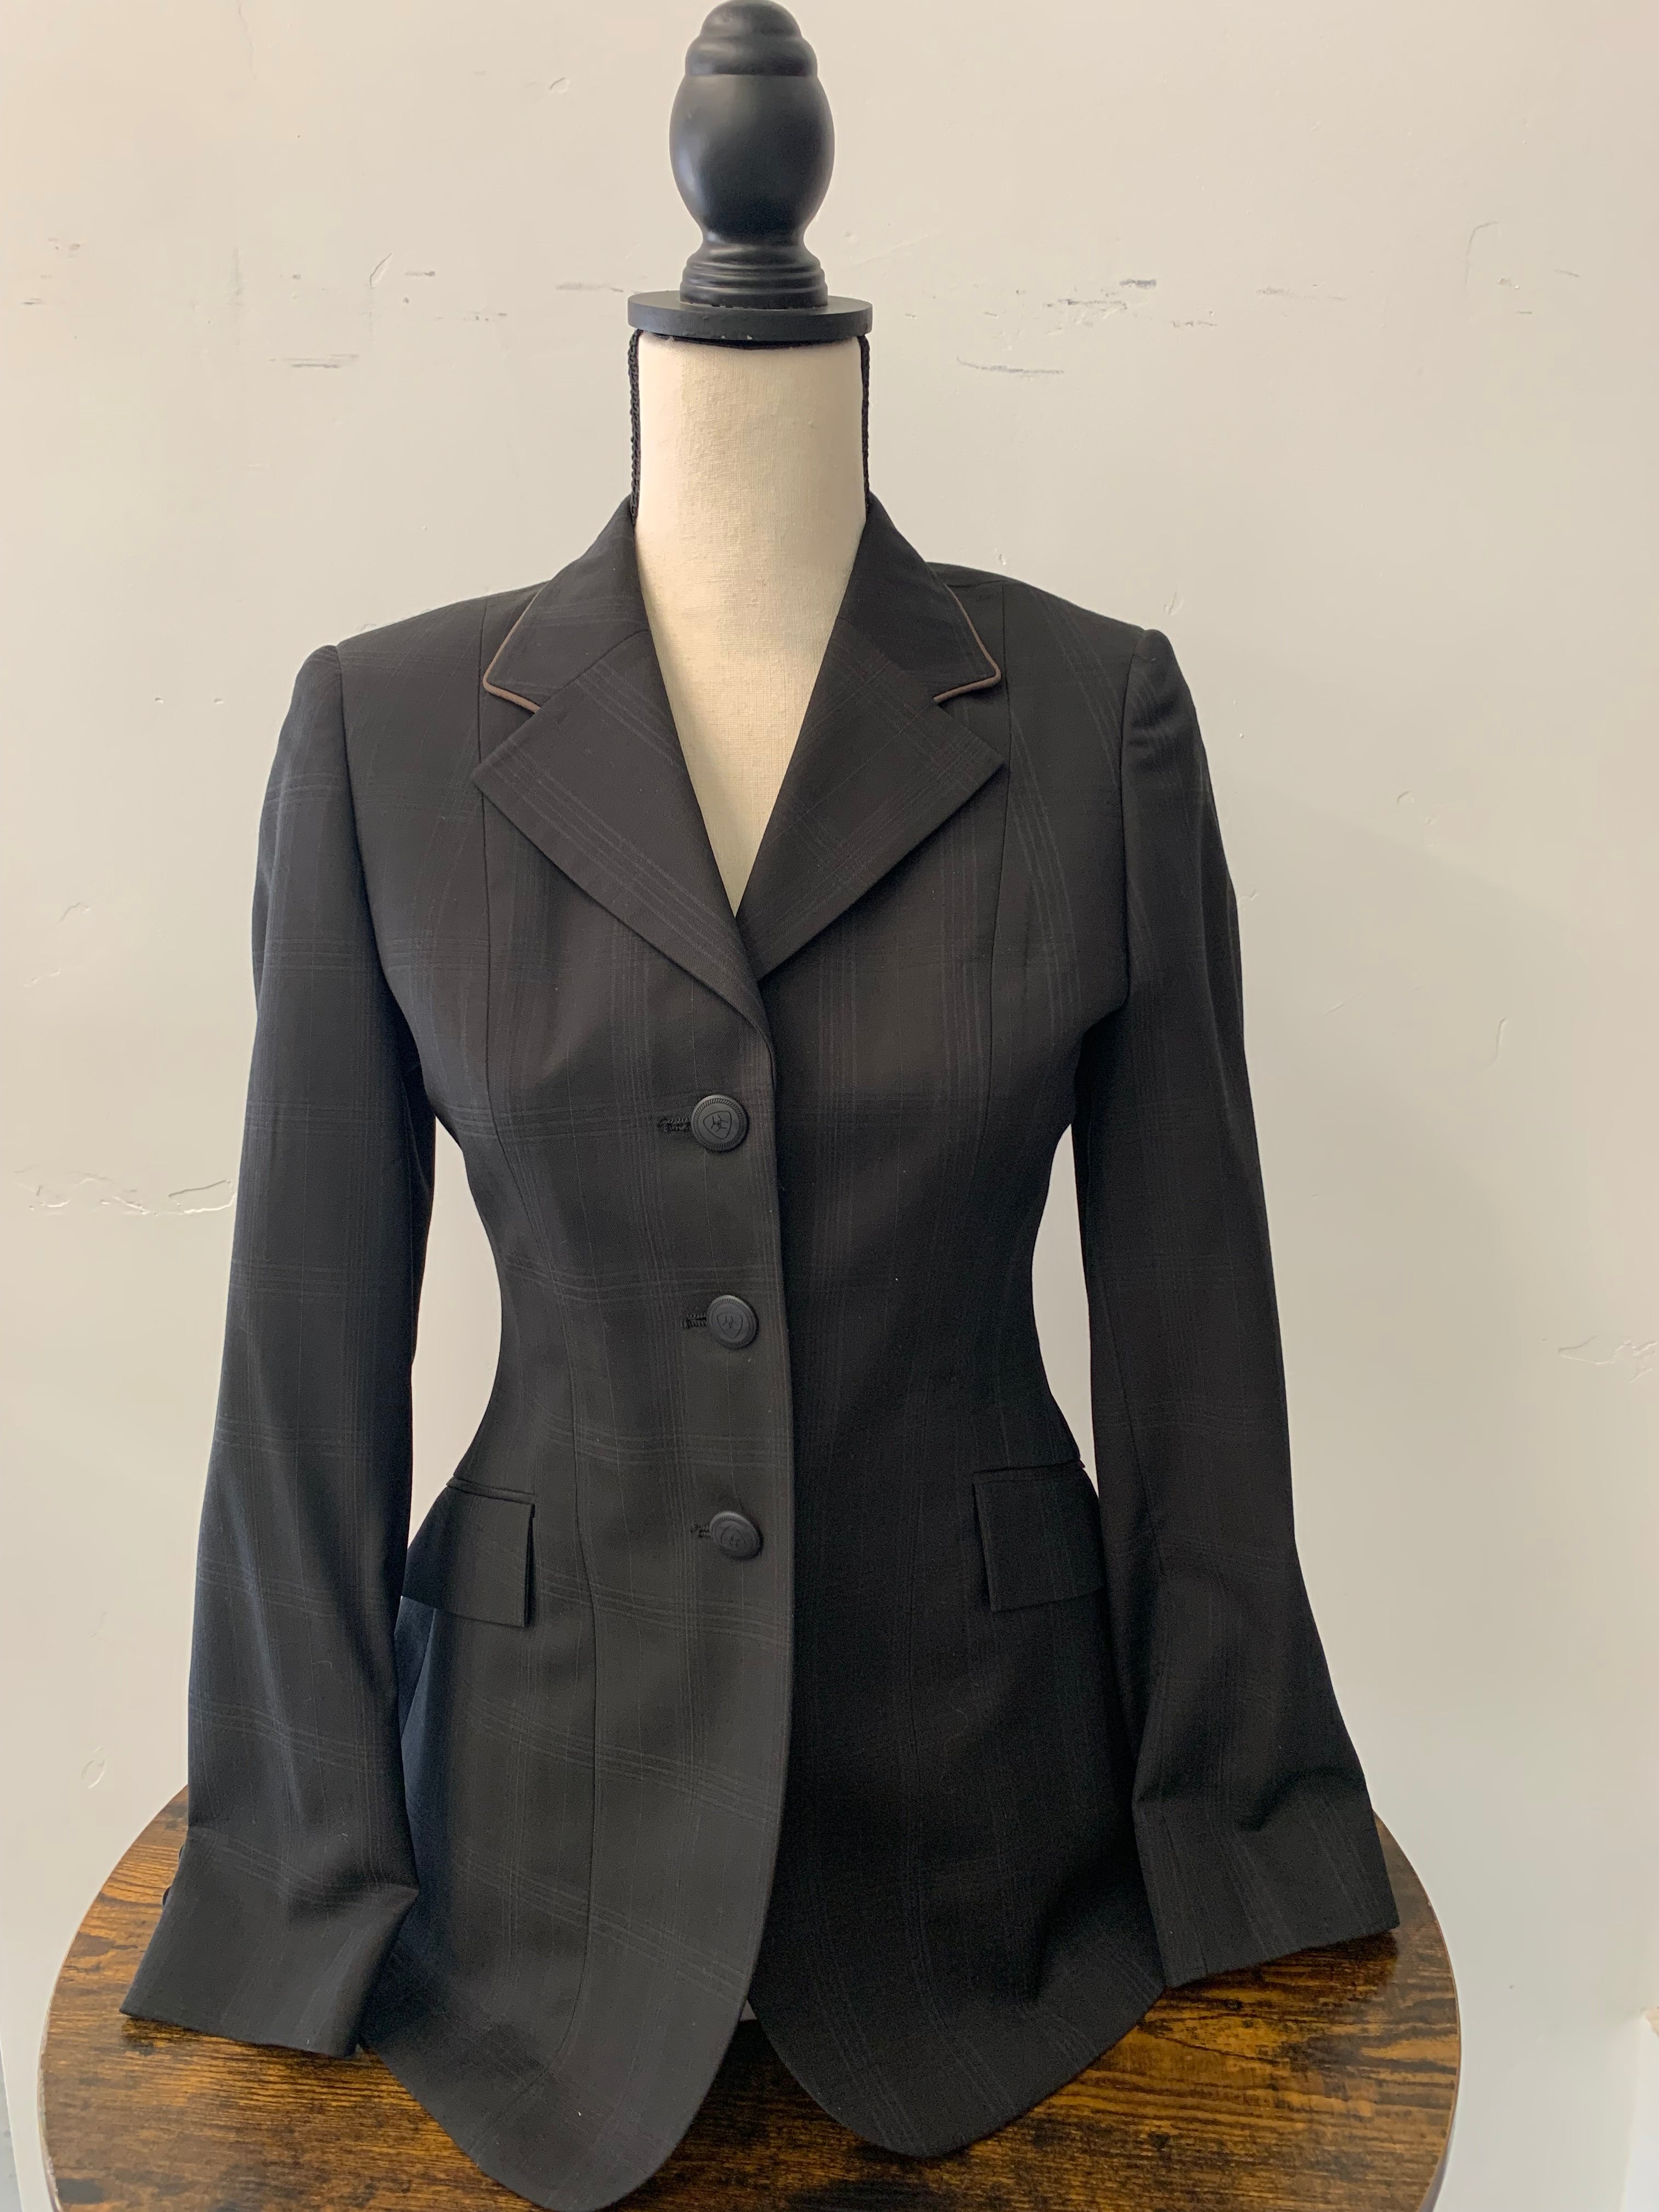 PRE-LOVED ARIAT PRO SERIES SHOW COAT